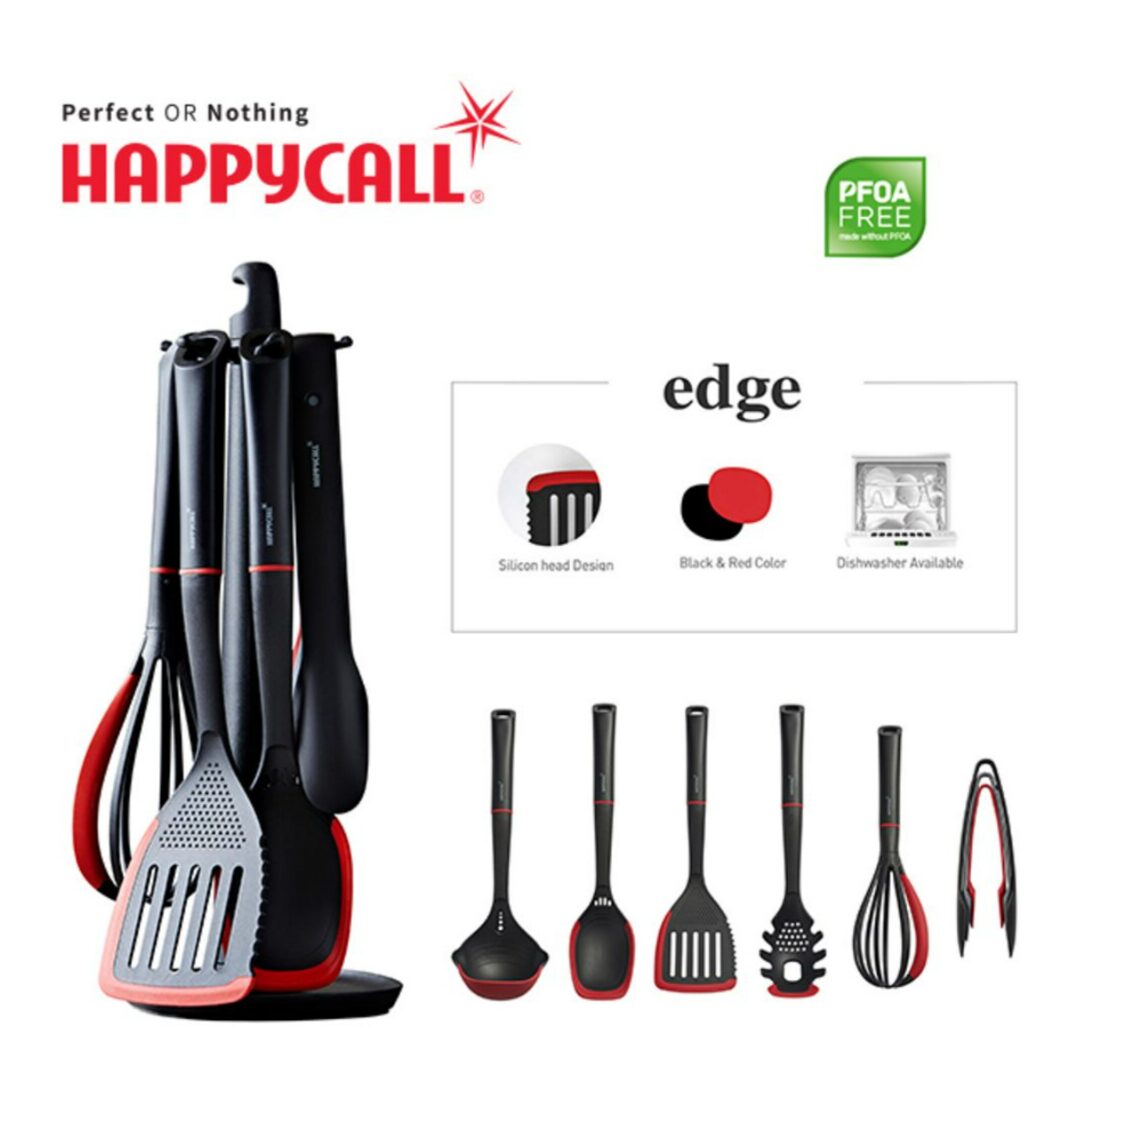 HAPPYCALL Edge Silicone Head 9-pc Cooking Tools Set 4900-0074